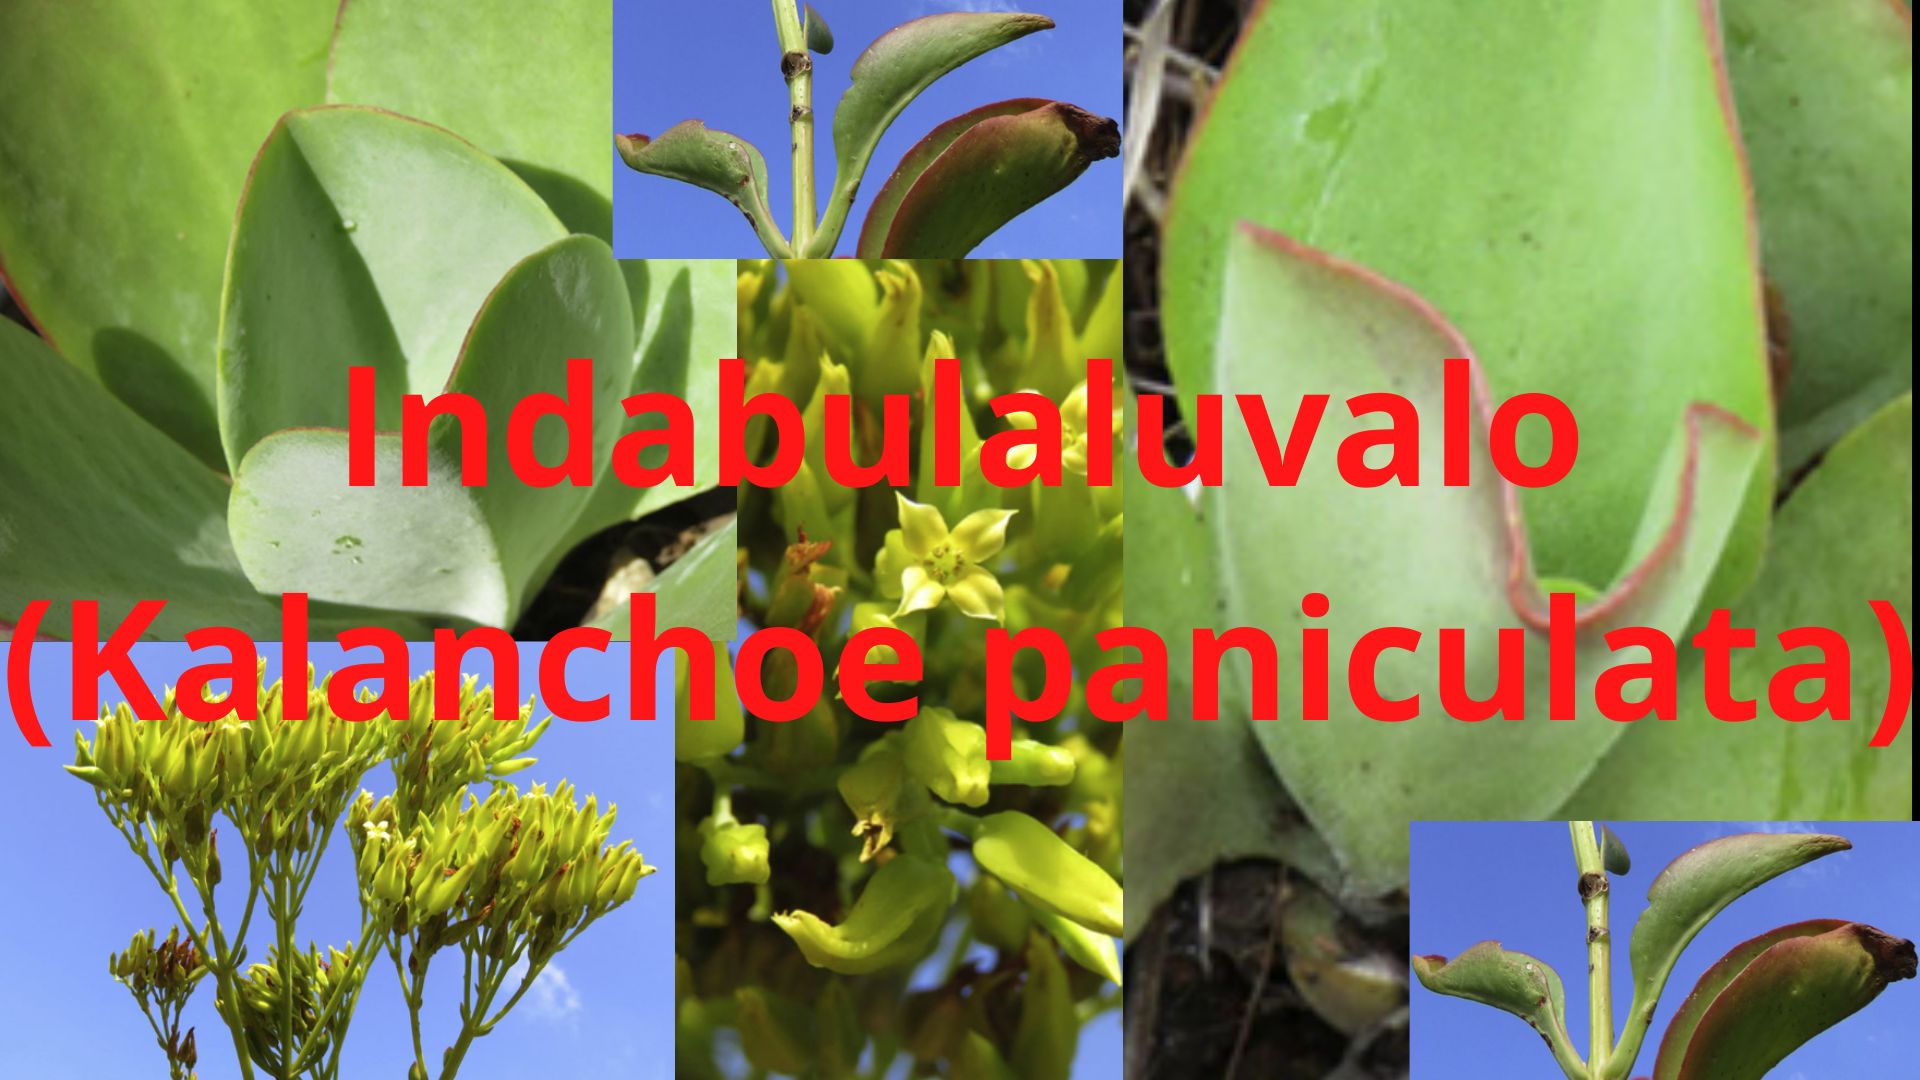 You are currently viewing Kalanchoe paniculata (Indabulaluvalo) – Treating Anxiety & Anxiousness